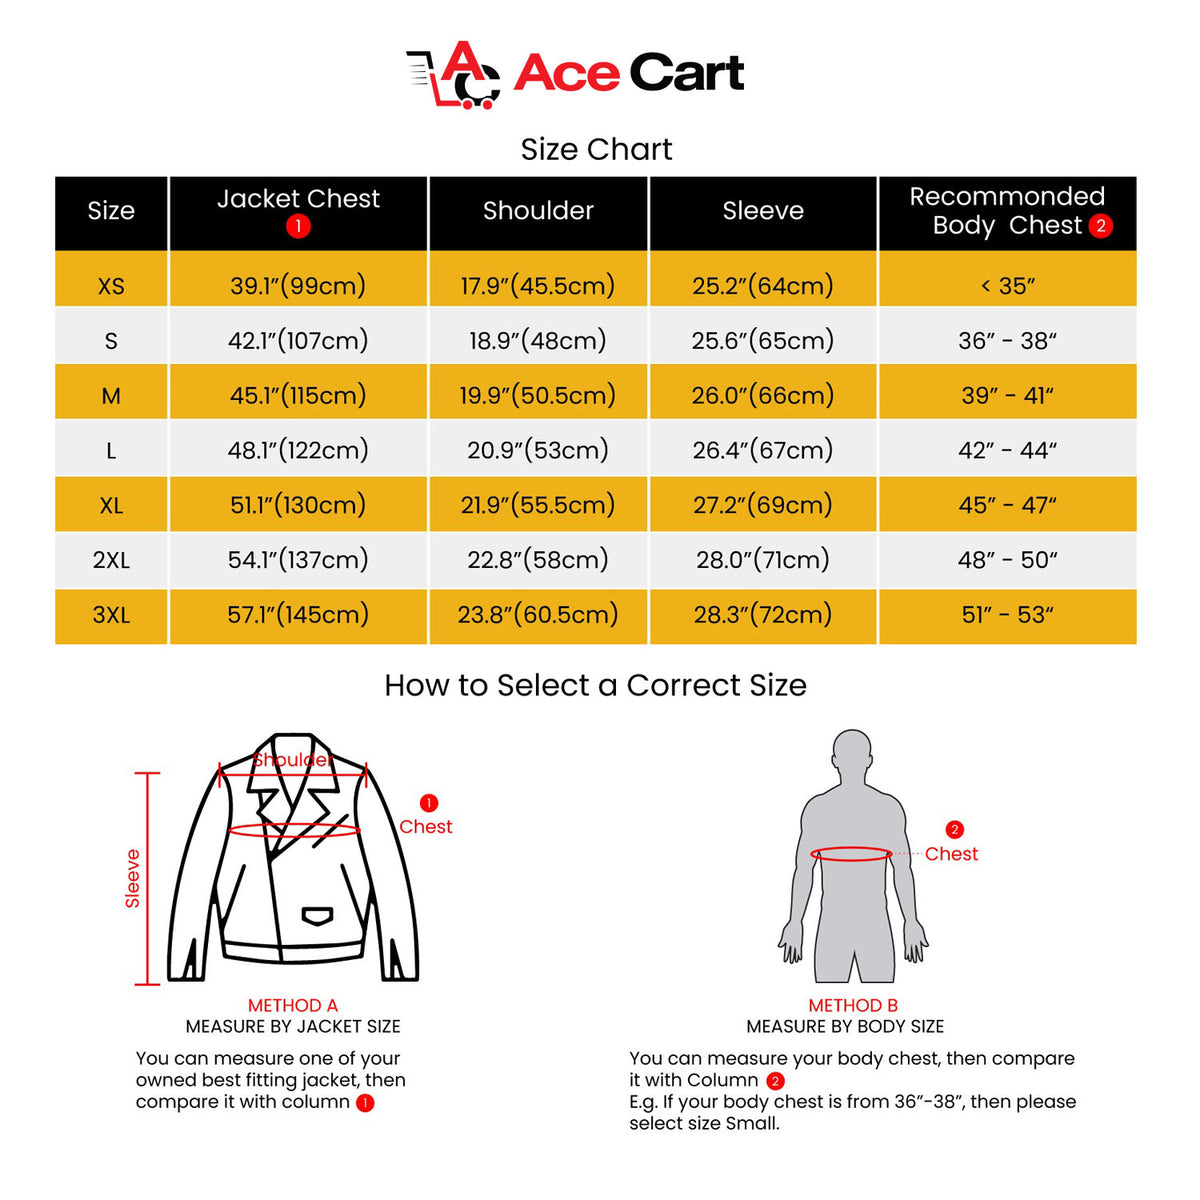 Mocha suede biker jacket with size chart and measurement instructions displayed on the Ace Cart product image.